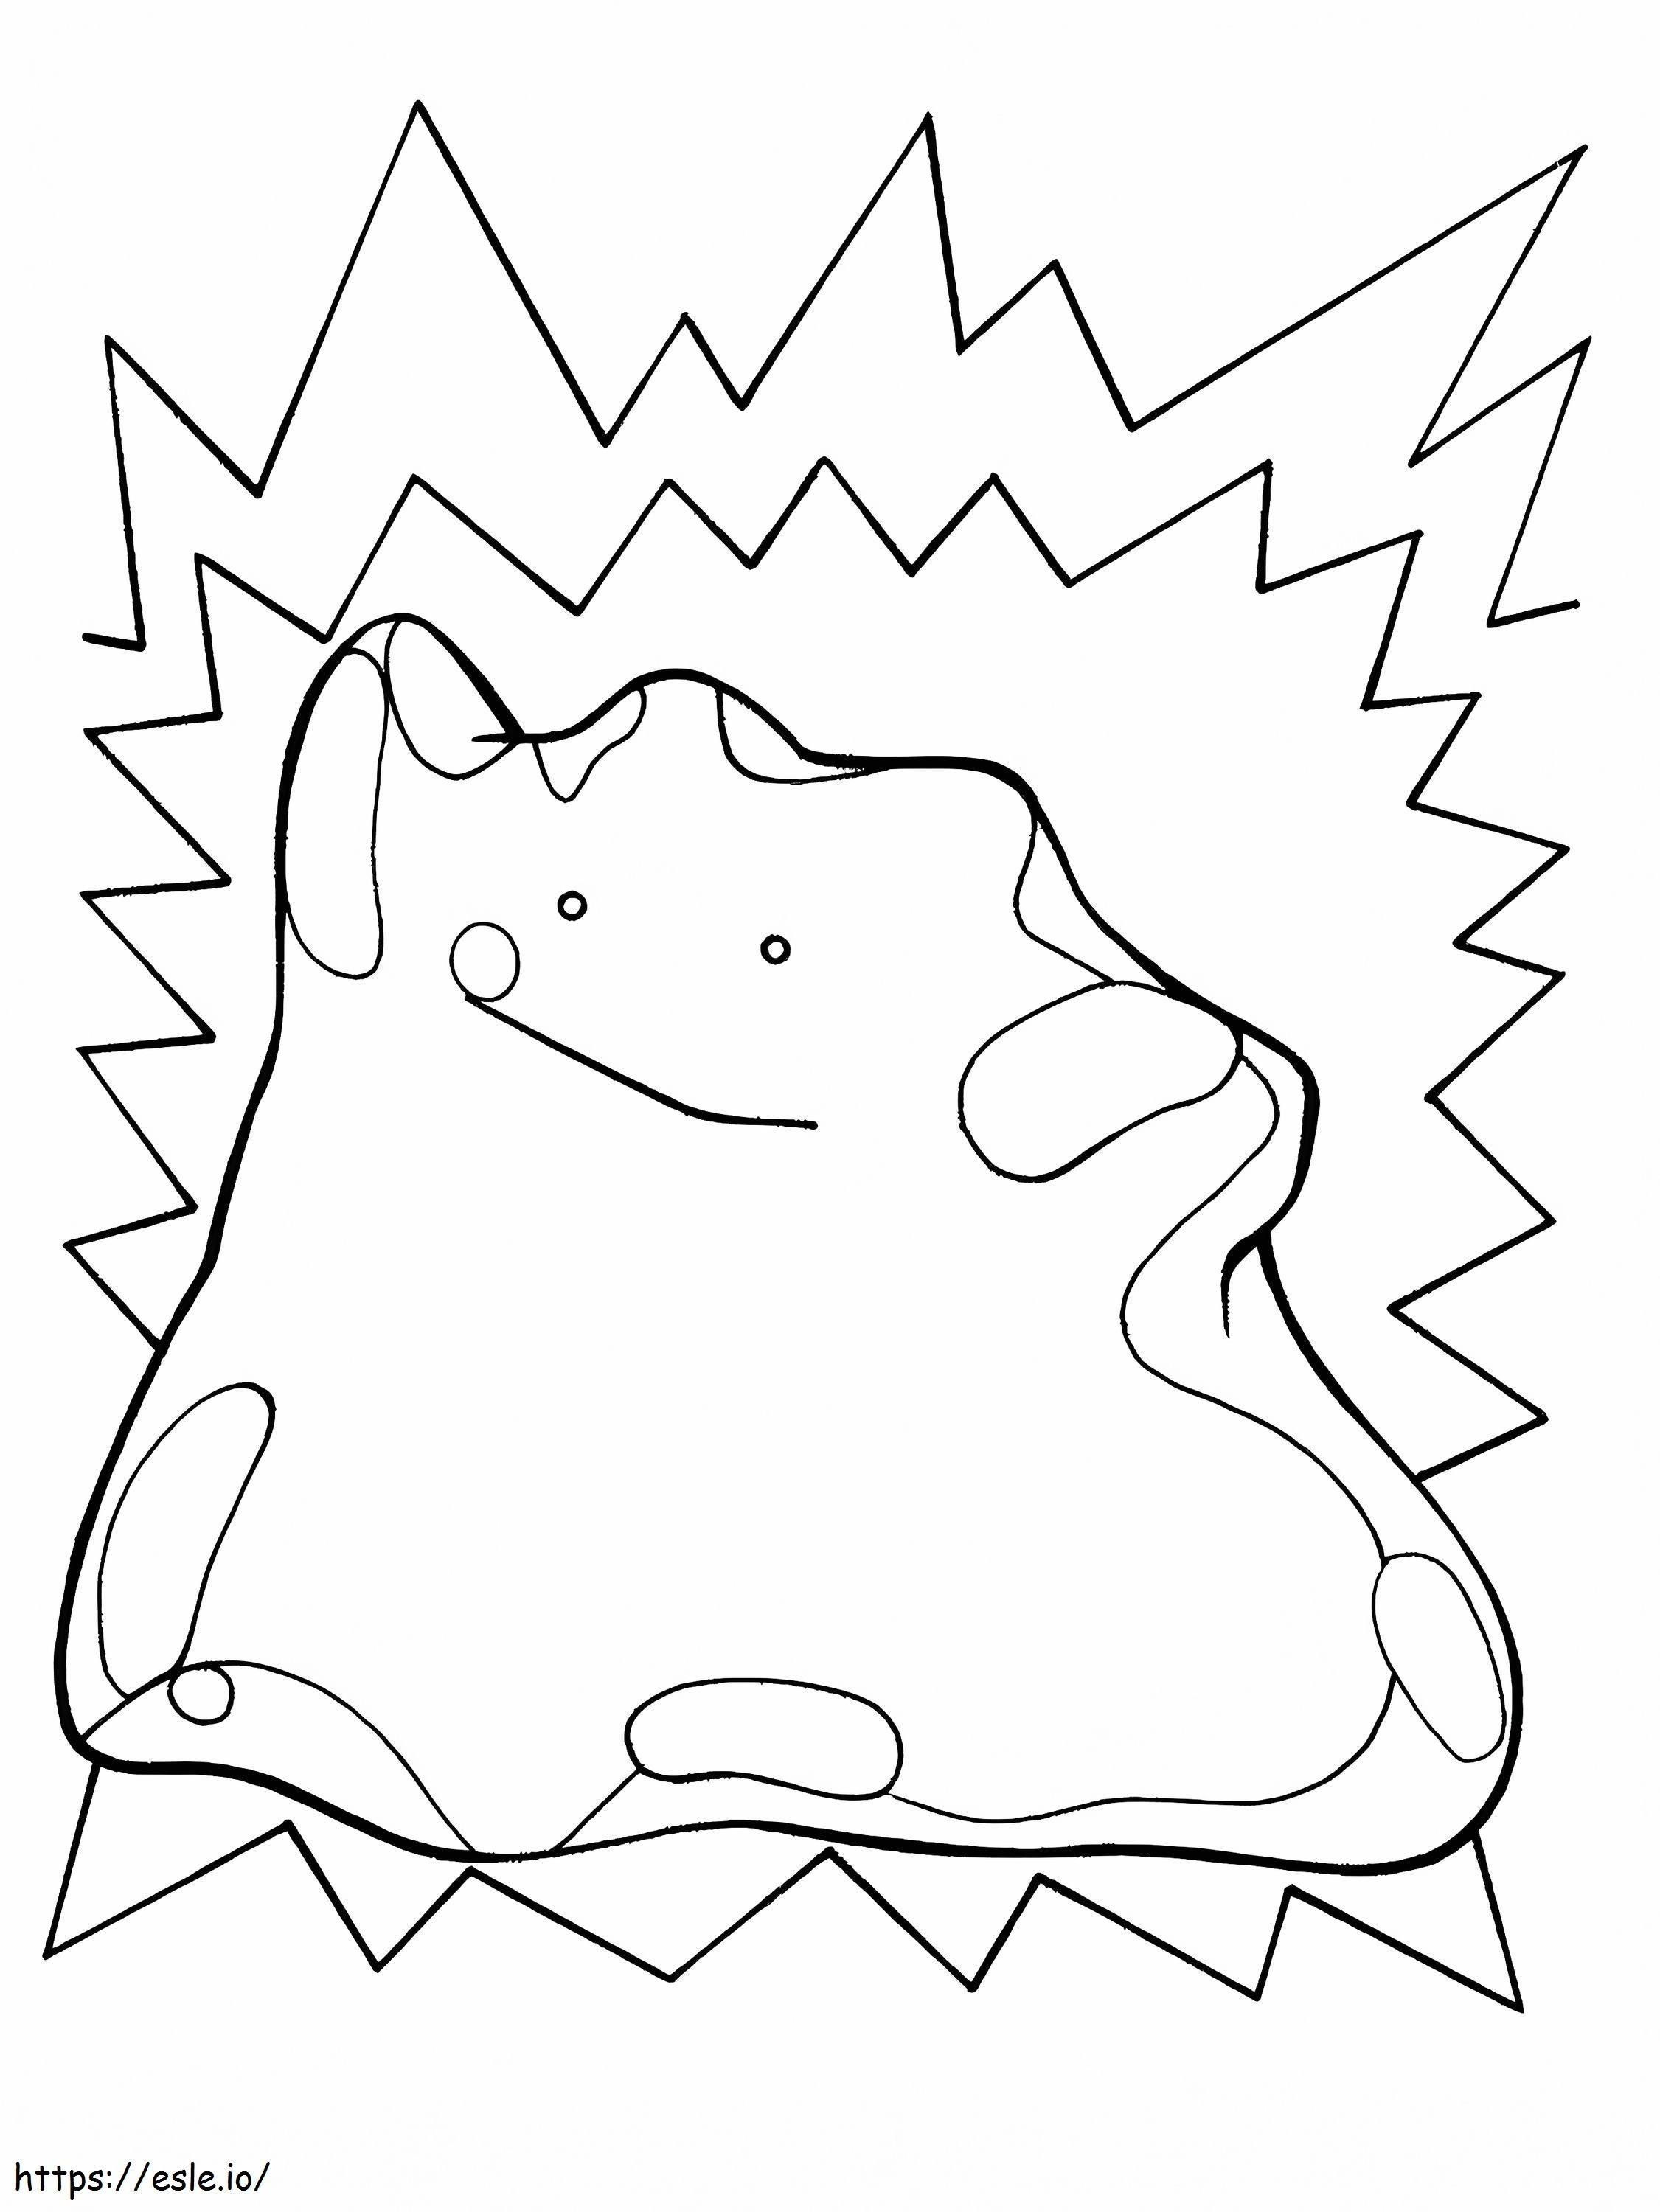 Ditto 4 coloring page